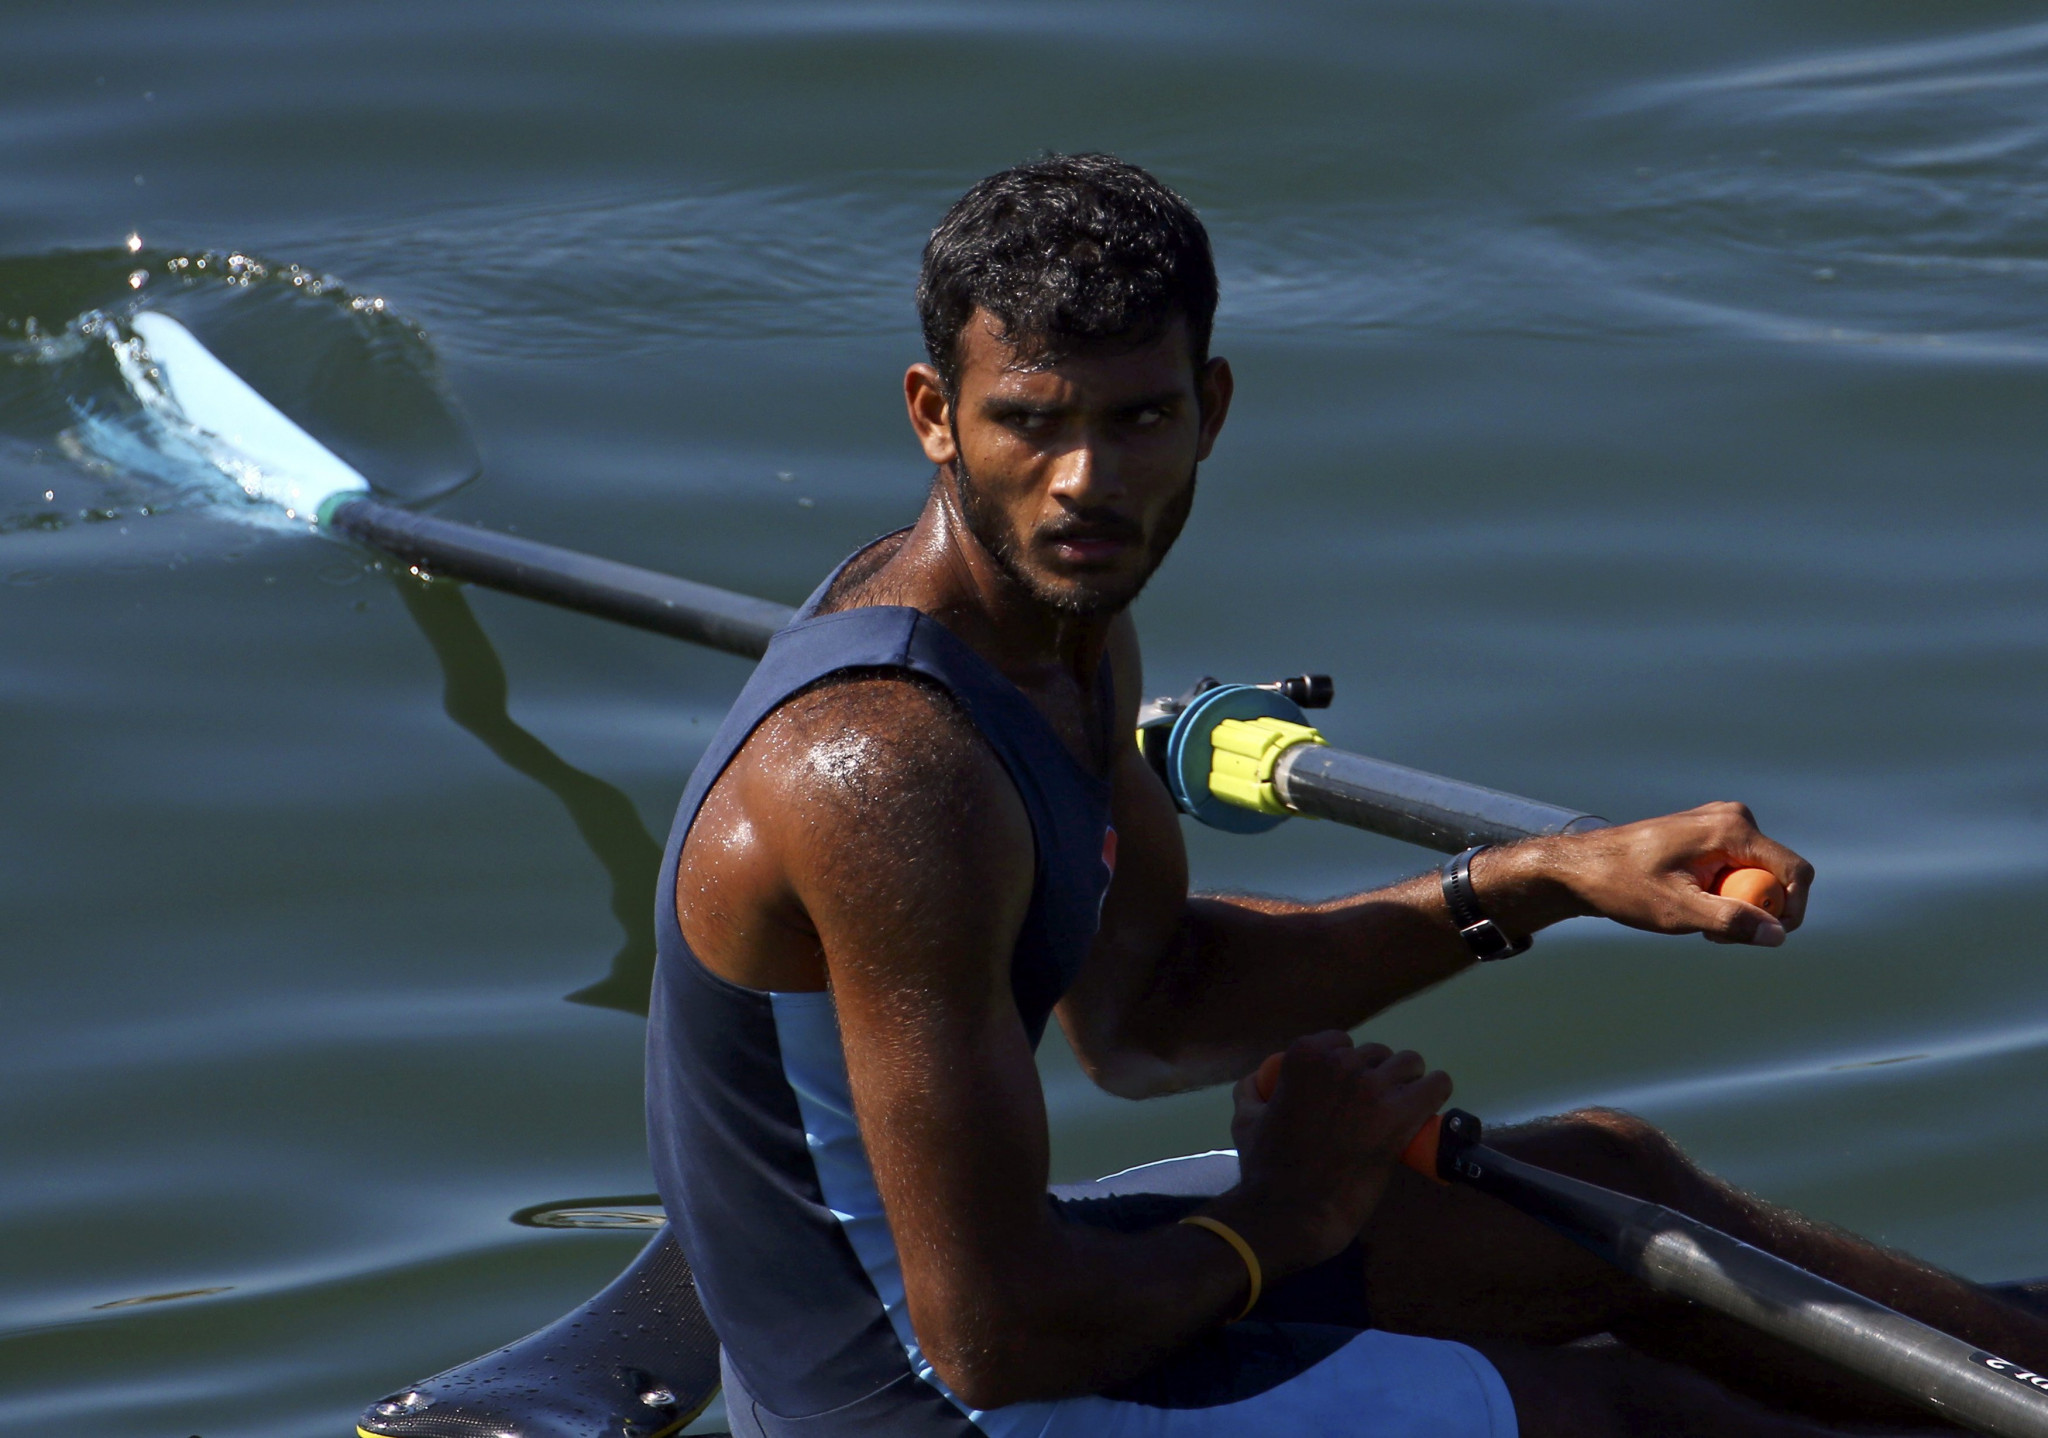 Asian Games champion Bhokanal's ban lifted by Rowing Federation of India